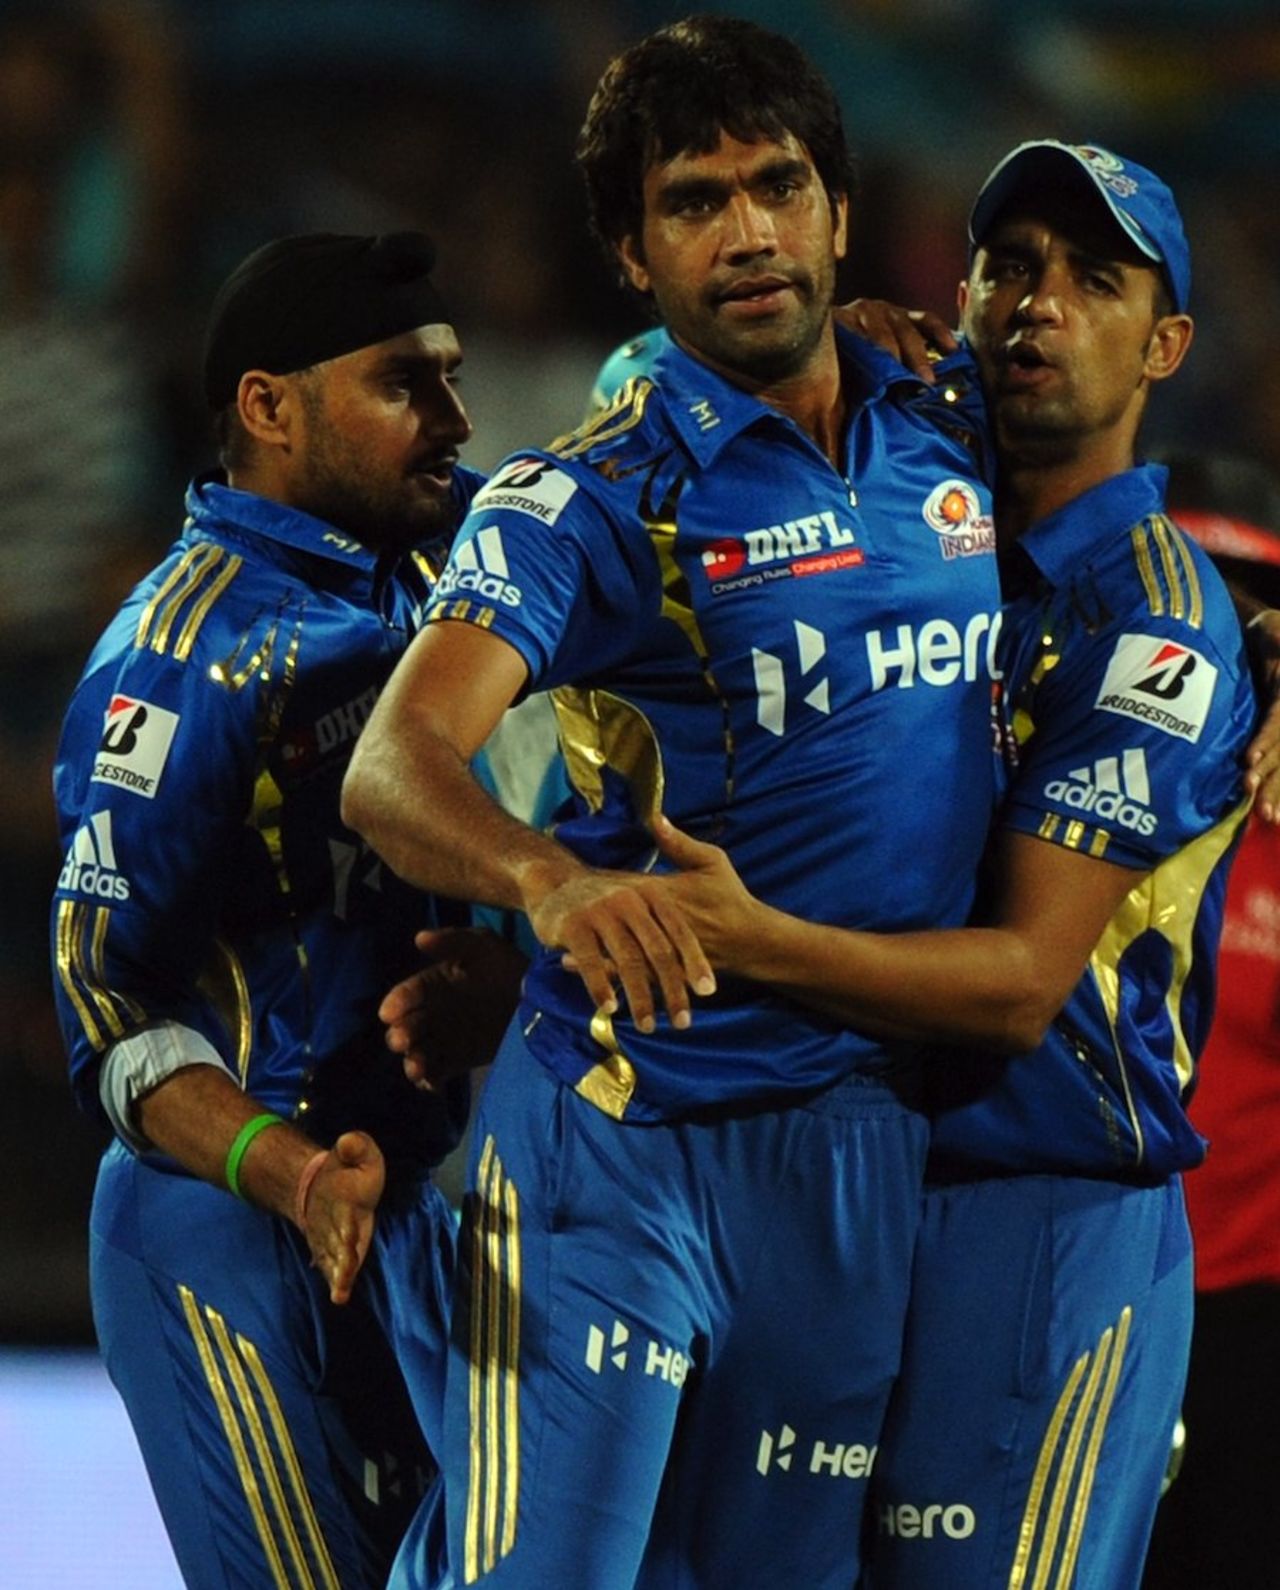 Munaf Patel defended 11 in the final over to earn a one-run win, Pune Warriors v Mumbai Indians, IPL, Pune, May 3, 2012